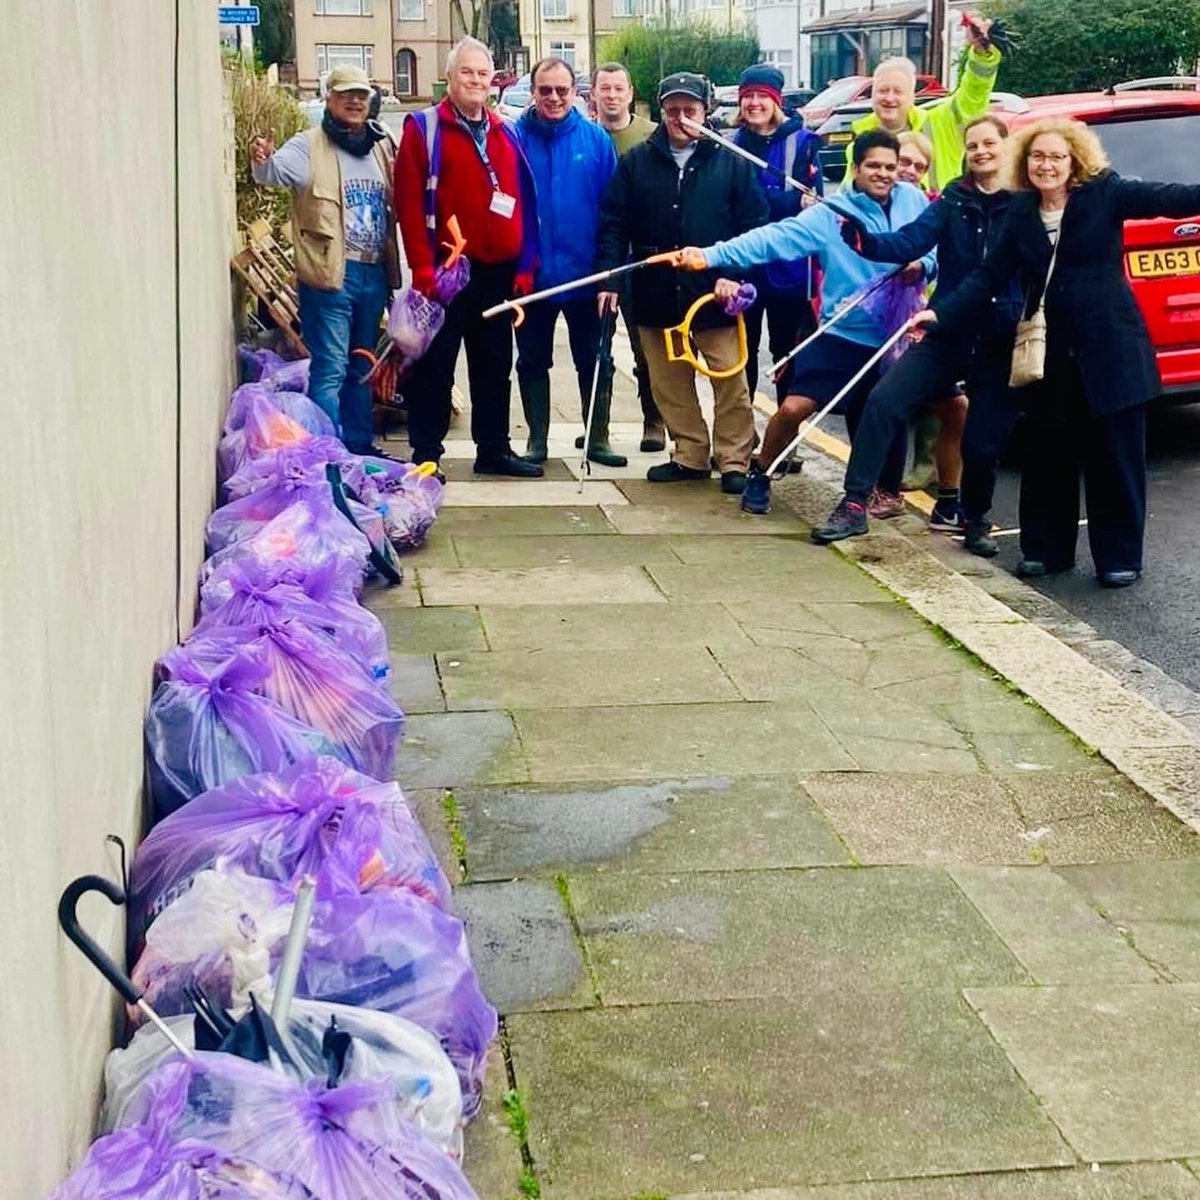 From the streets of South Harrow to the @UKParliament. It was a privilege to welcome many of our dedicated @HarrowLitter Pickers to Westminster, to thank them for their amazing contribution to the #GreatBritishSpringClean in South Harrow. (1/3)